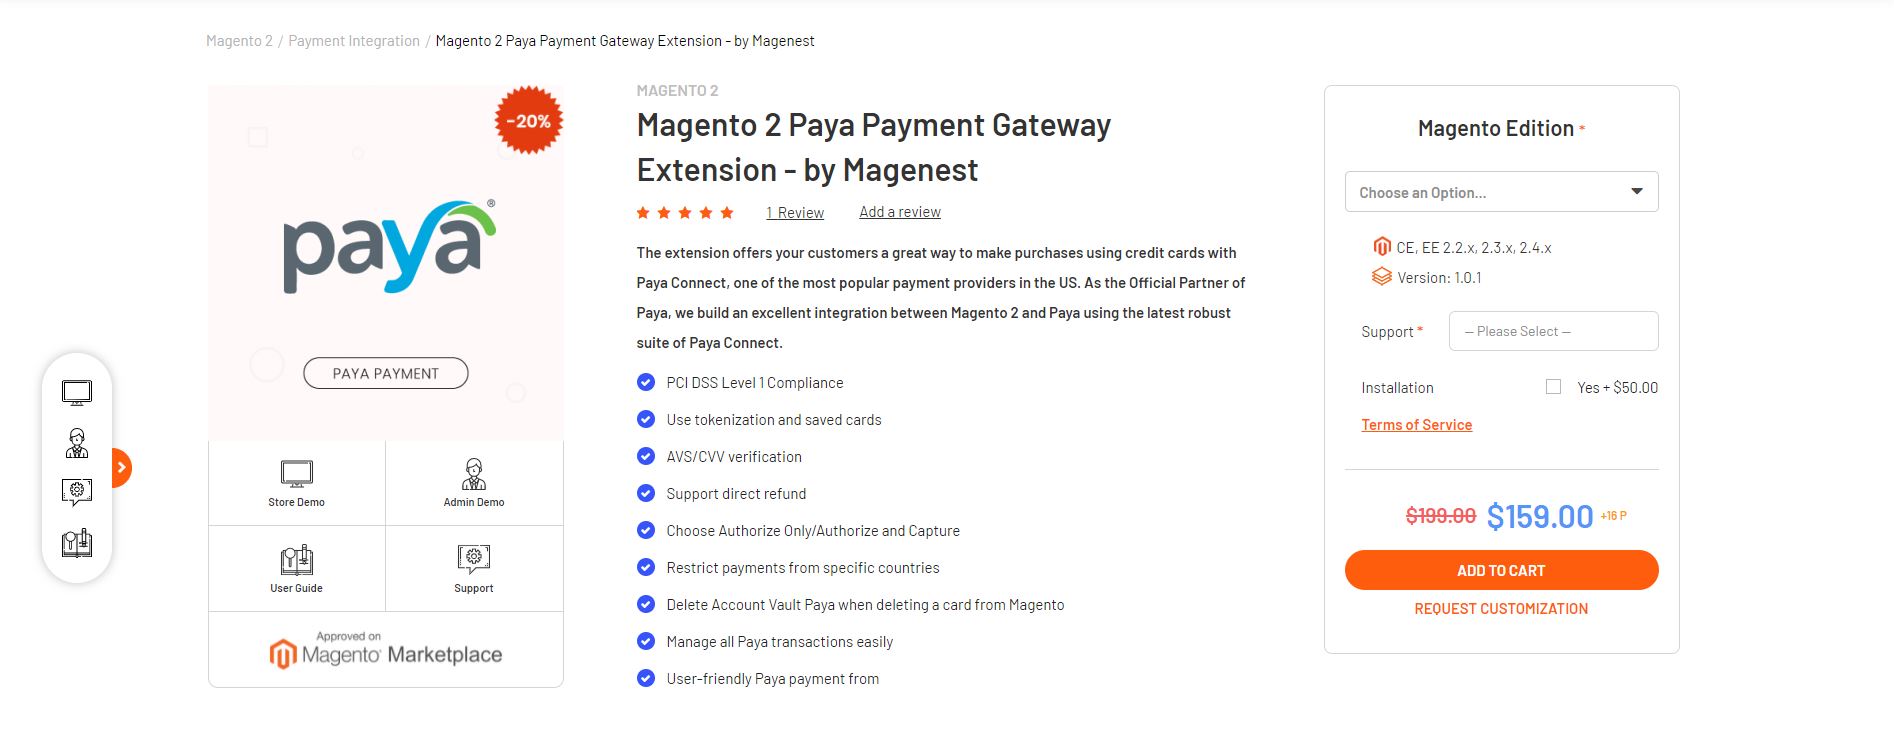 Magento payment gateway extension